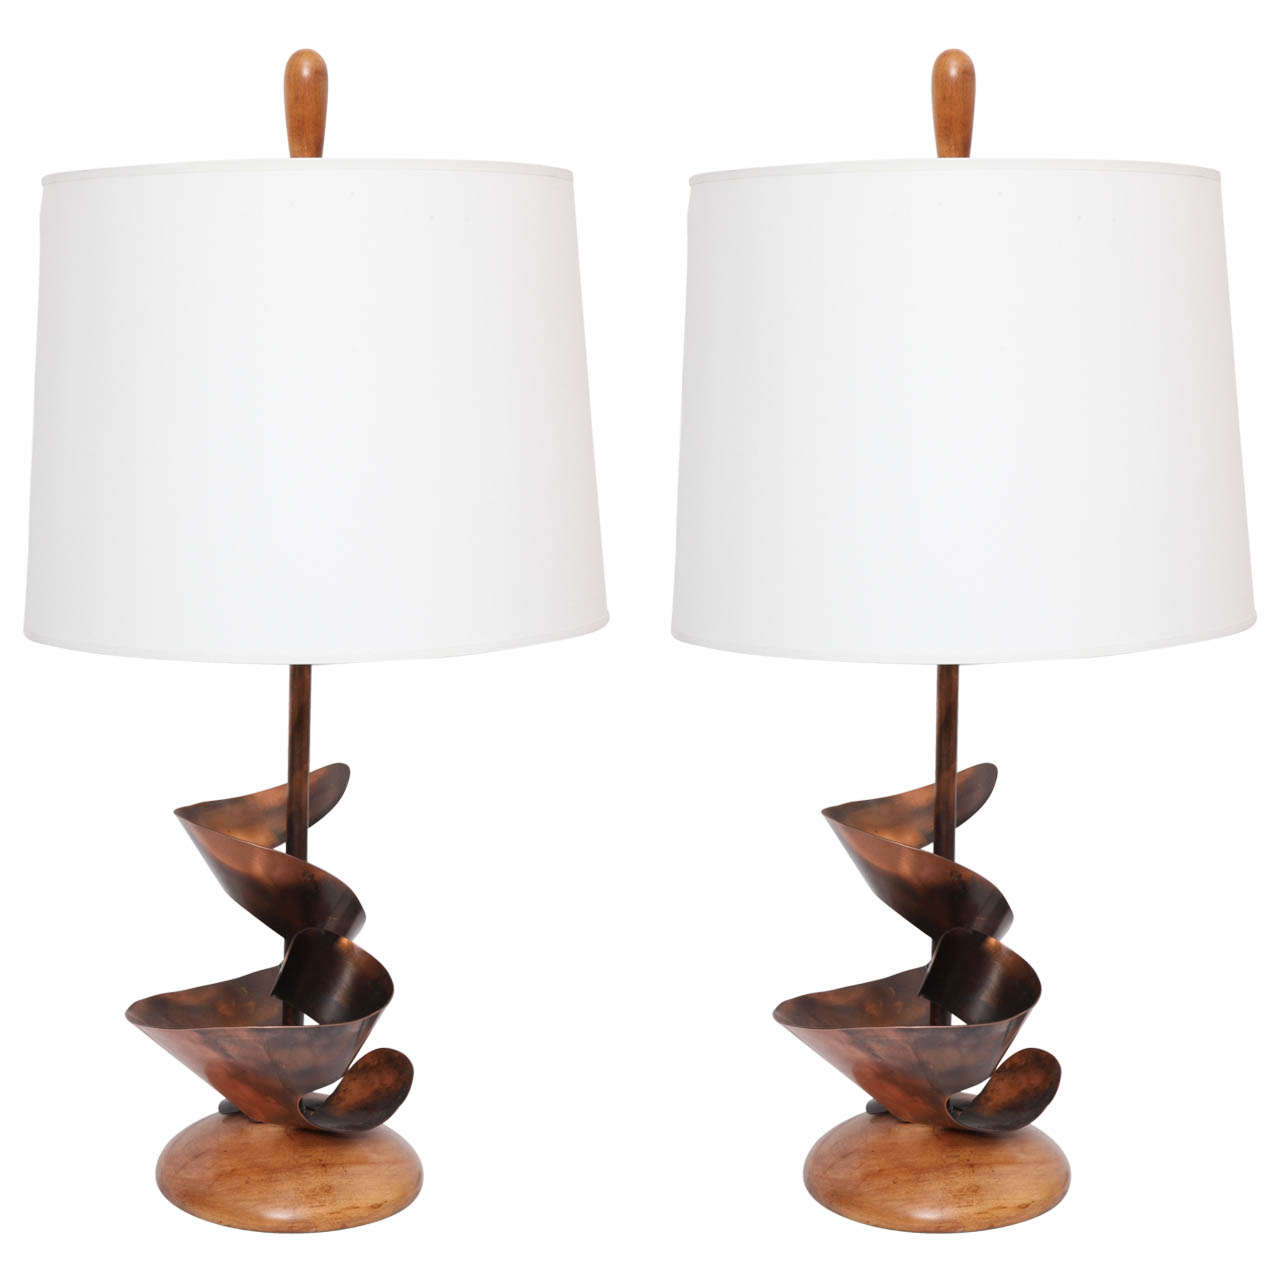 Pair of 1950s Sculptural Patinated Copper Table Lamps by Heifetz